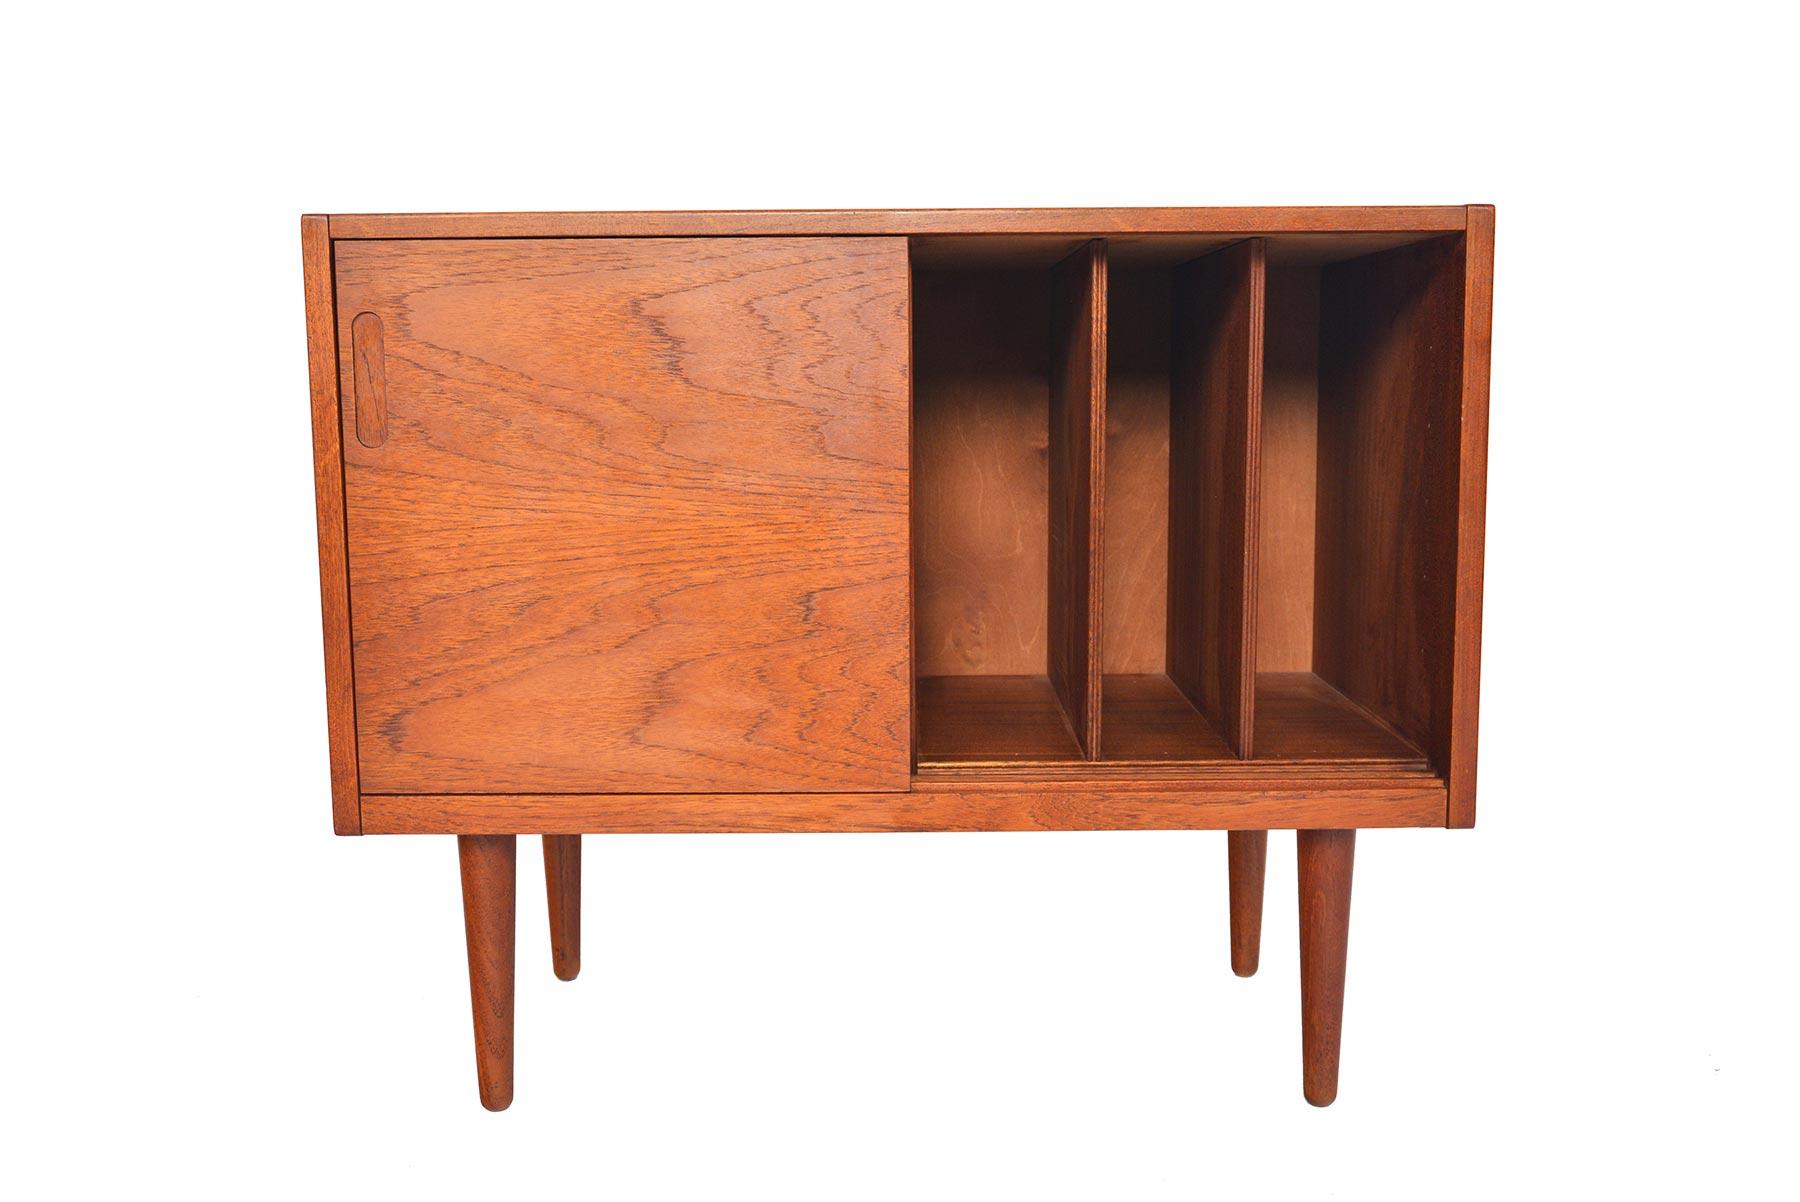 This Danish modern midcentury small record cabinet is crafted with stunning bookmatched wood grain on the doors. They open to reveal four record dividers. In excellent original condition.

   